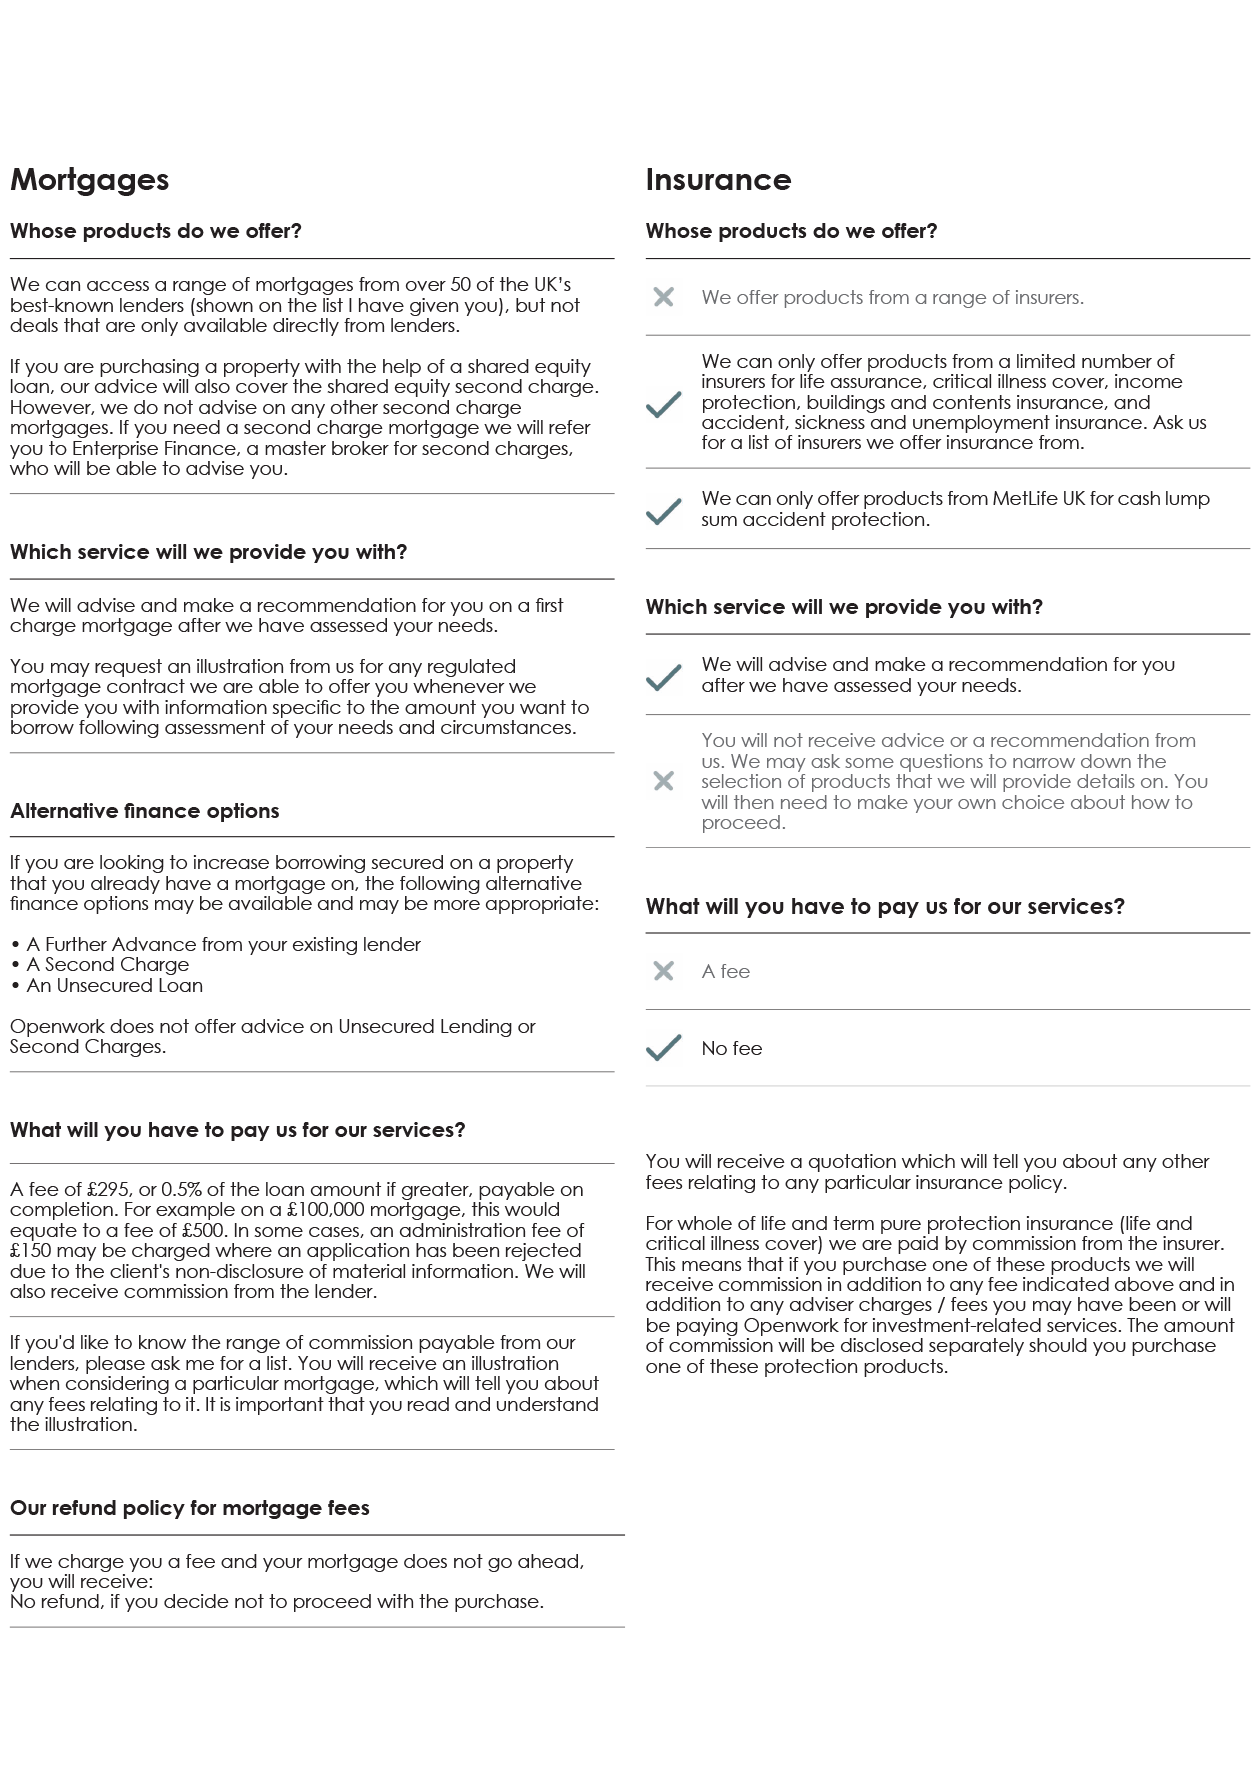 Mortgage and Insurance Proposition Brochure - Page 3